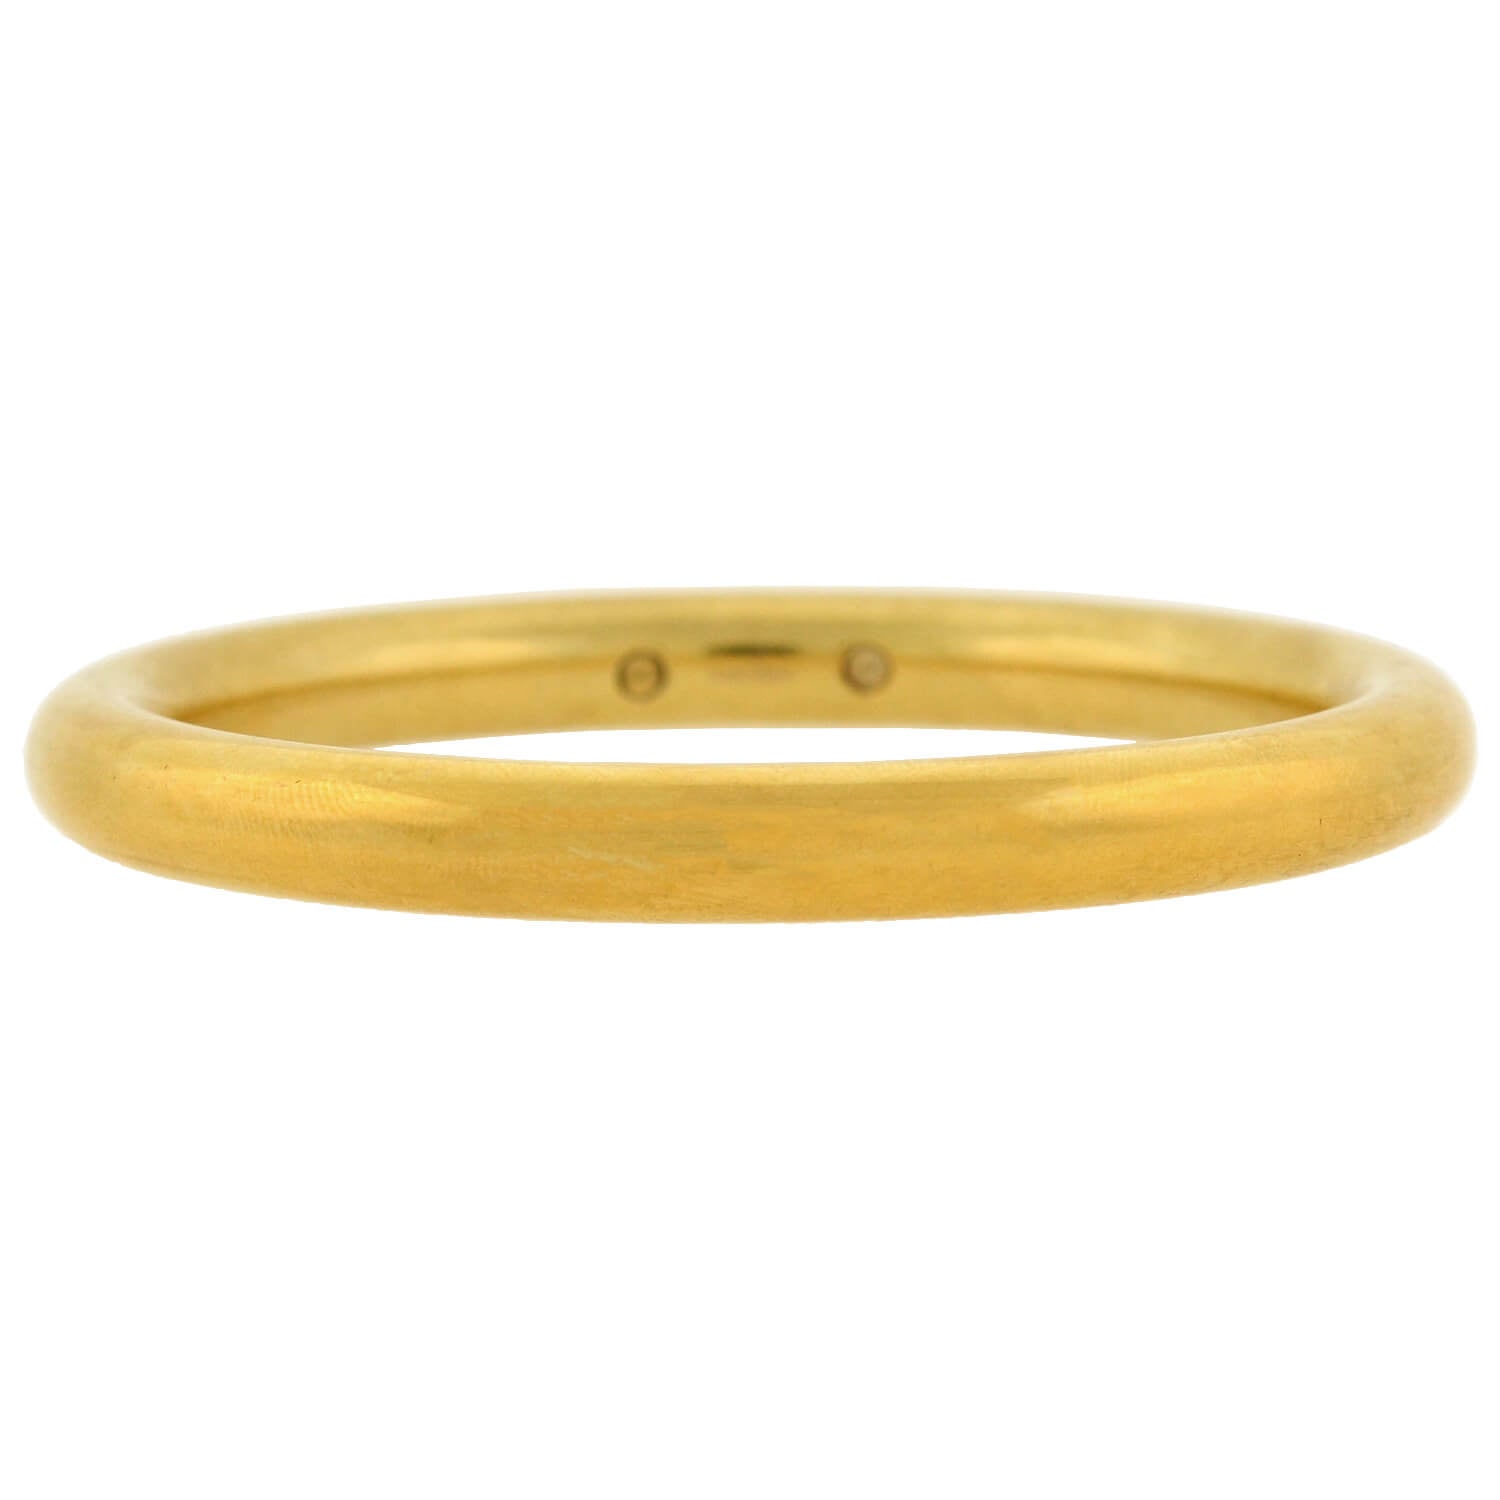 Deep Gold w/ Clear Layer - Small Resin Bangle - Epoxy Resin Bracelet w/ Mica Powder - Small Circle - Waterproof - Lightweight - Durable